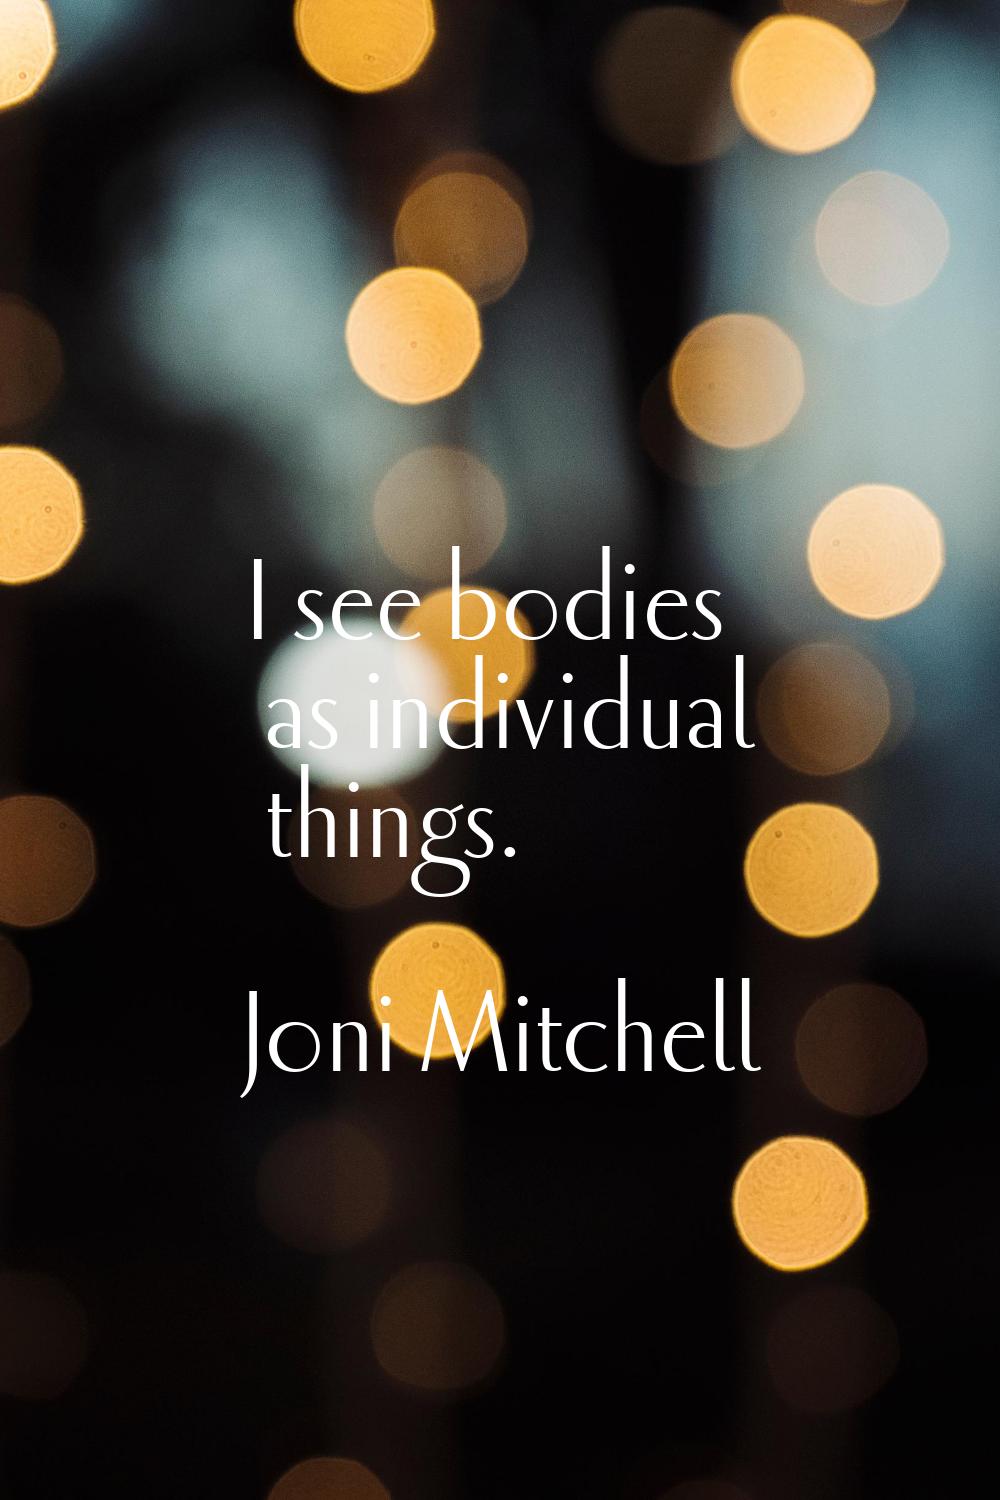 I see bodies as individual things.